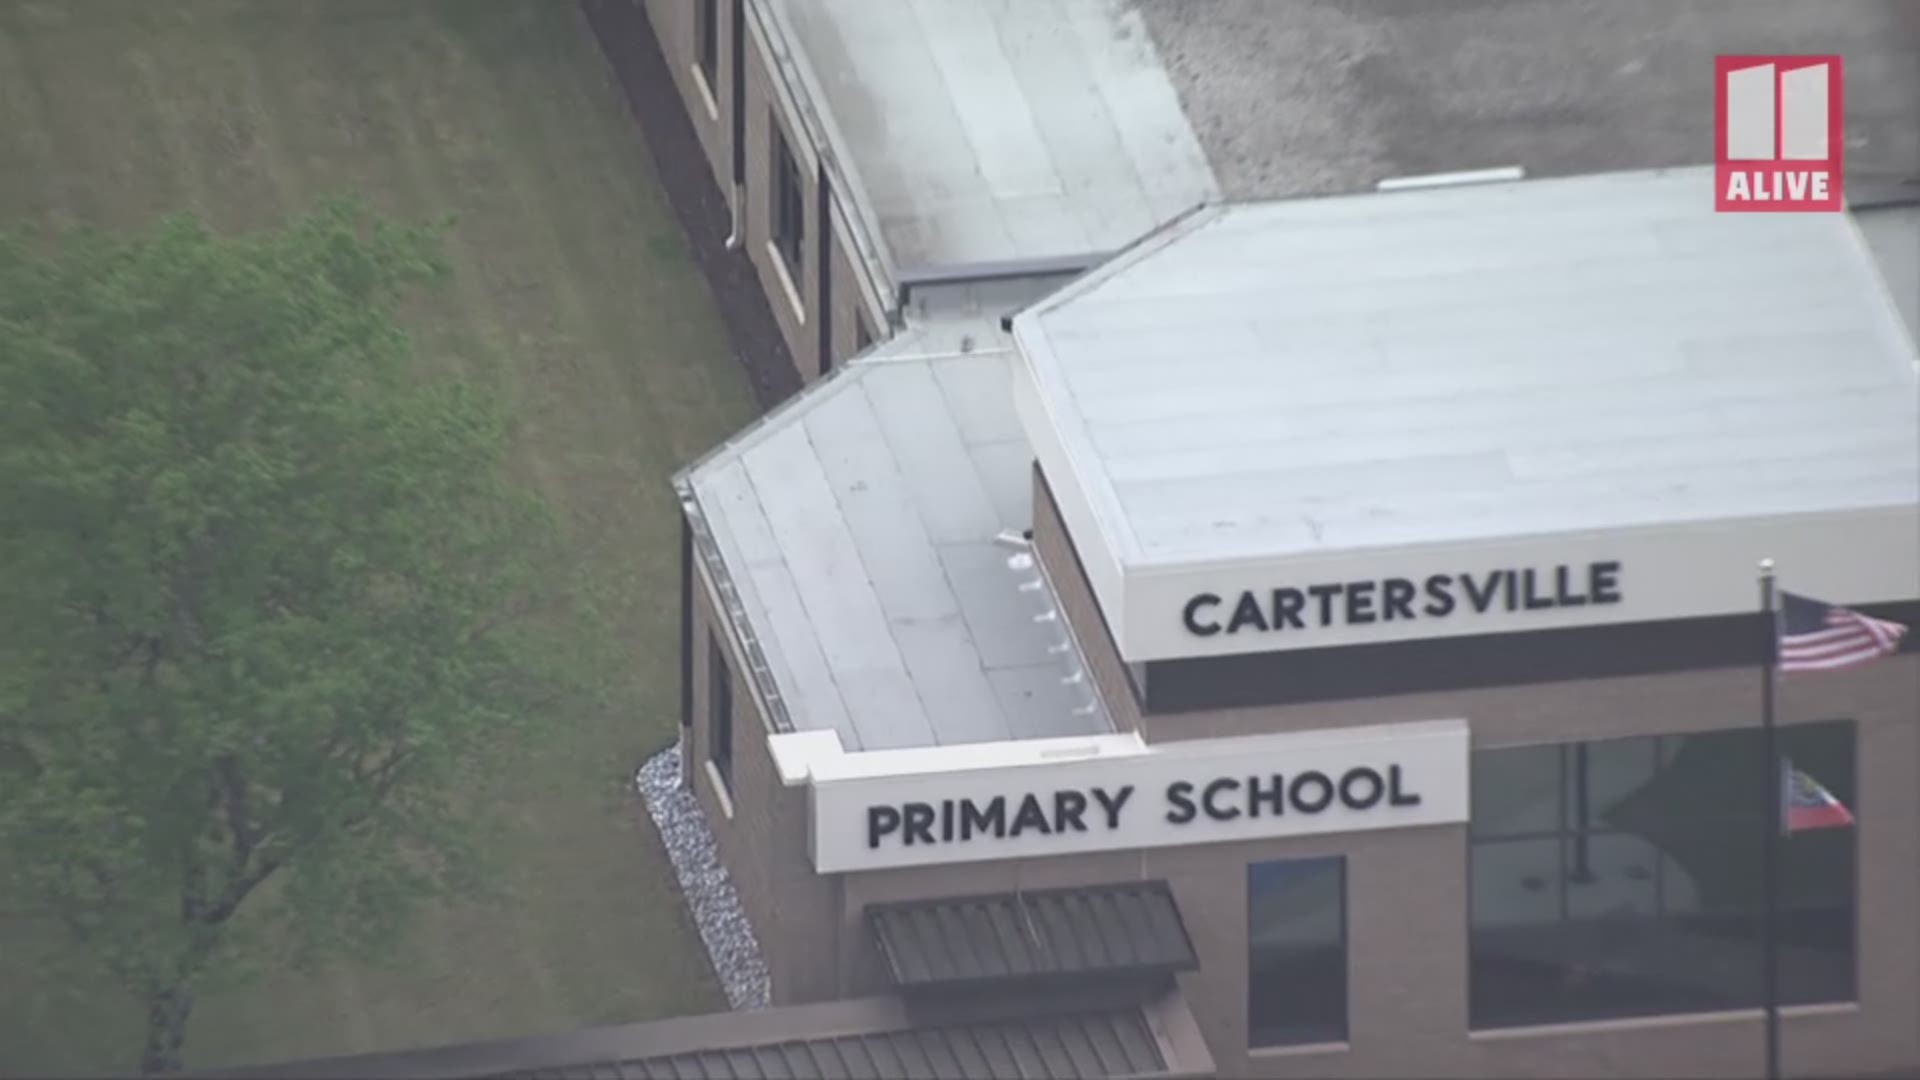 Due to a threat to a Cartersville City Schools location, the district placed 4 schools on lockdown.